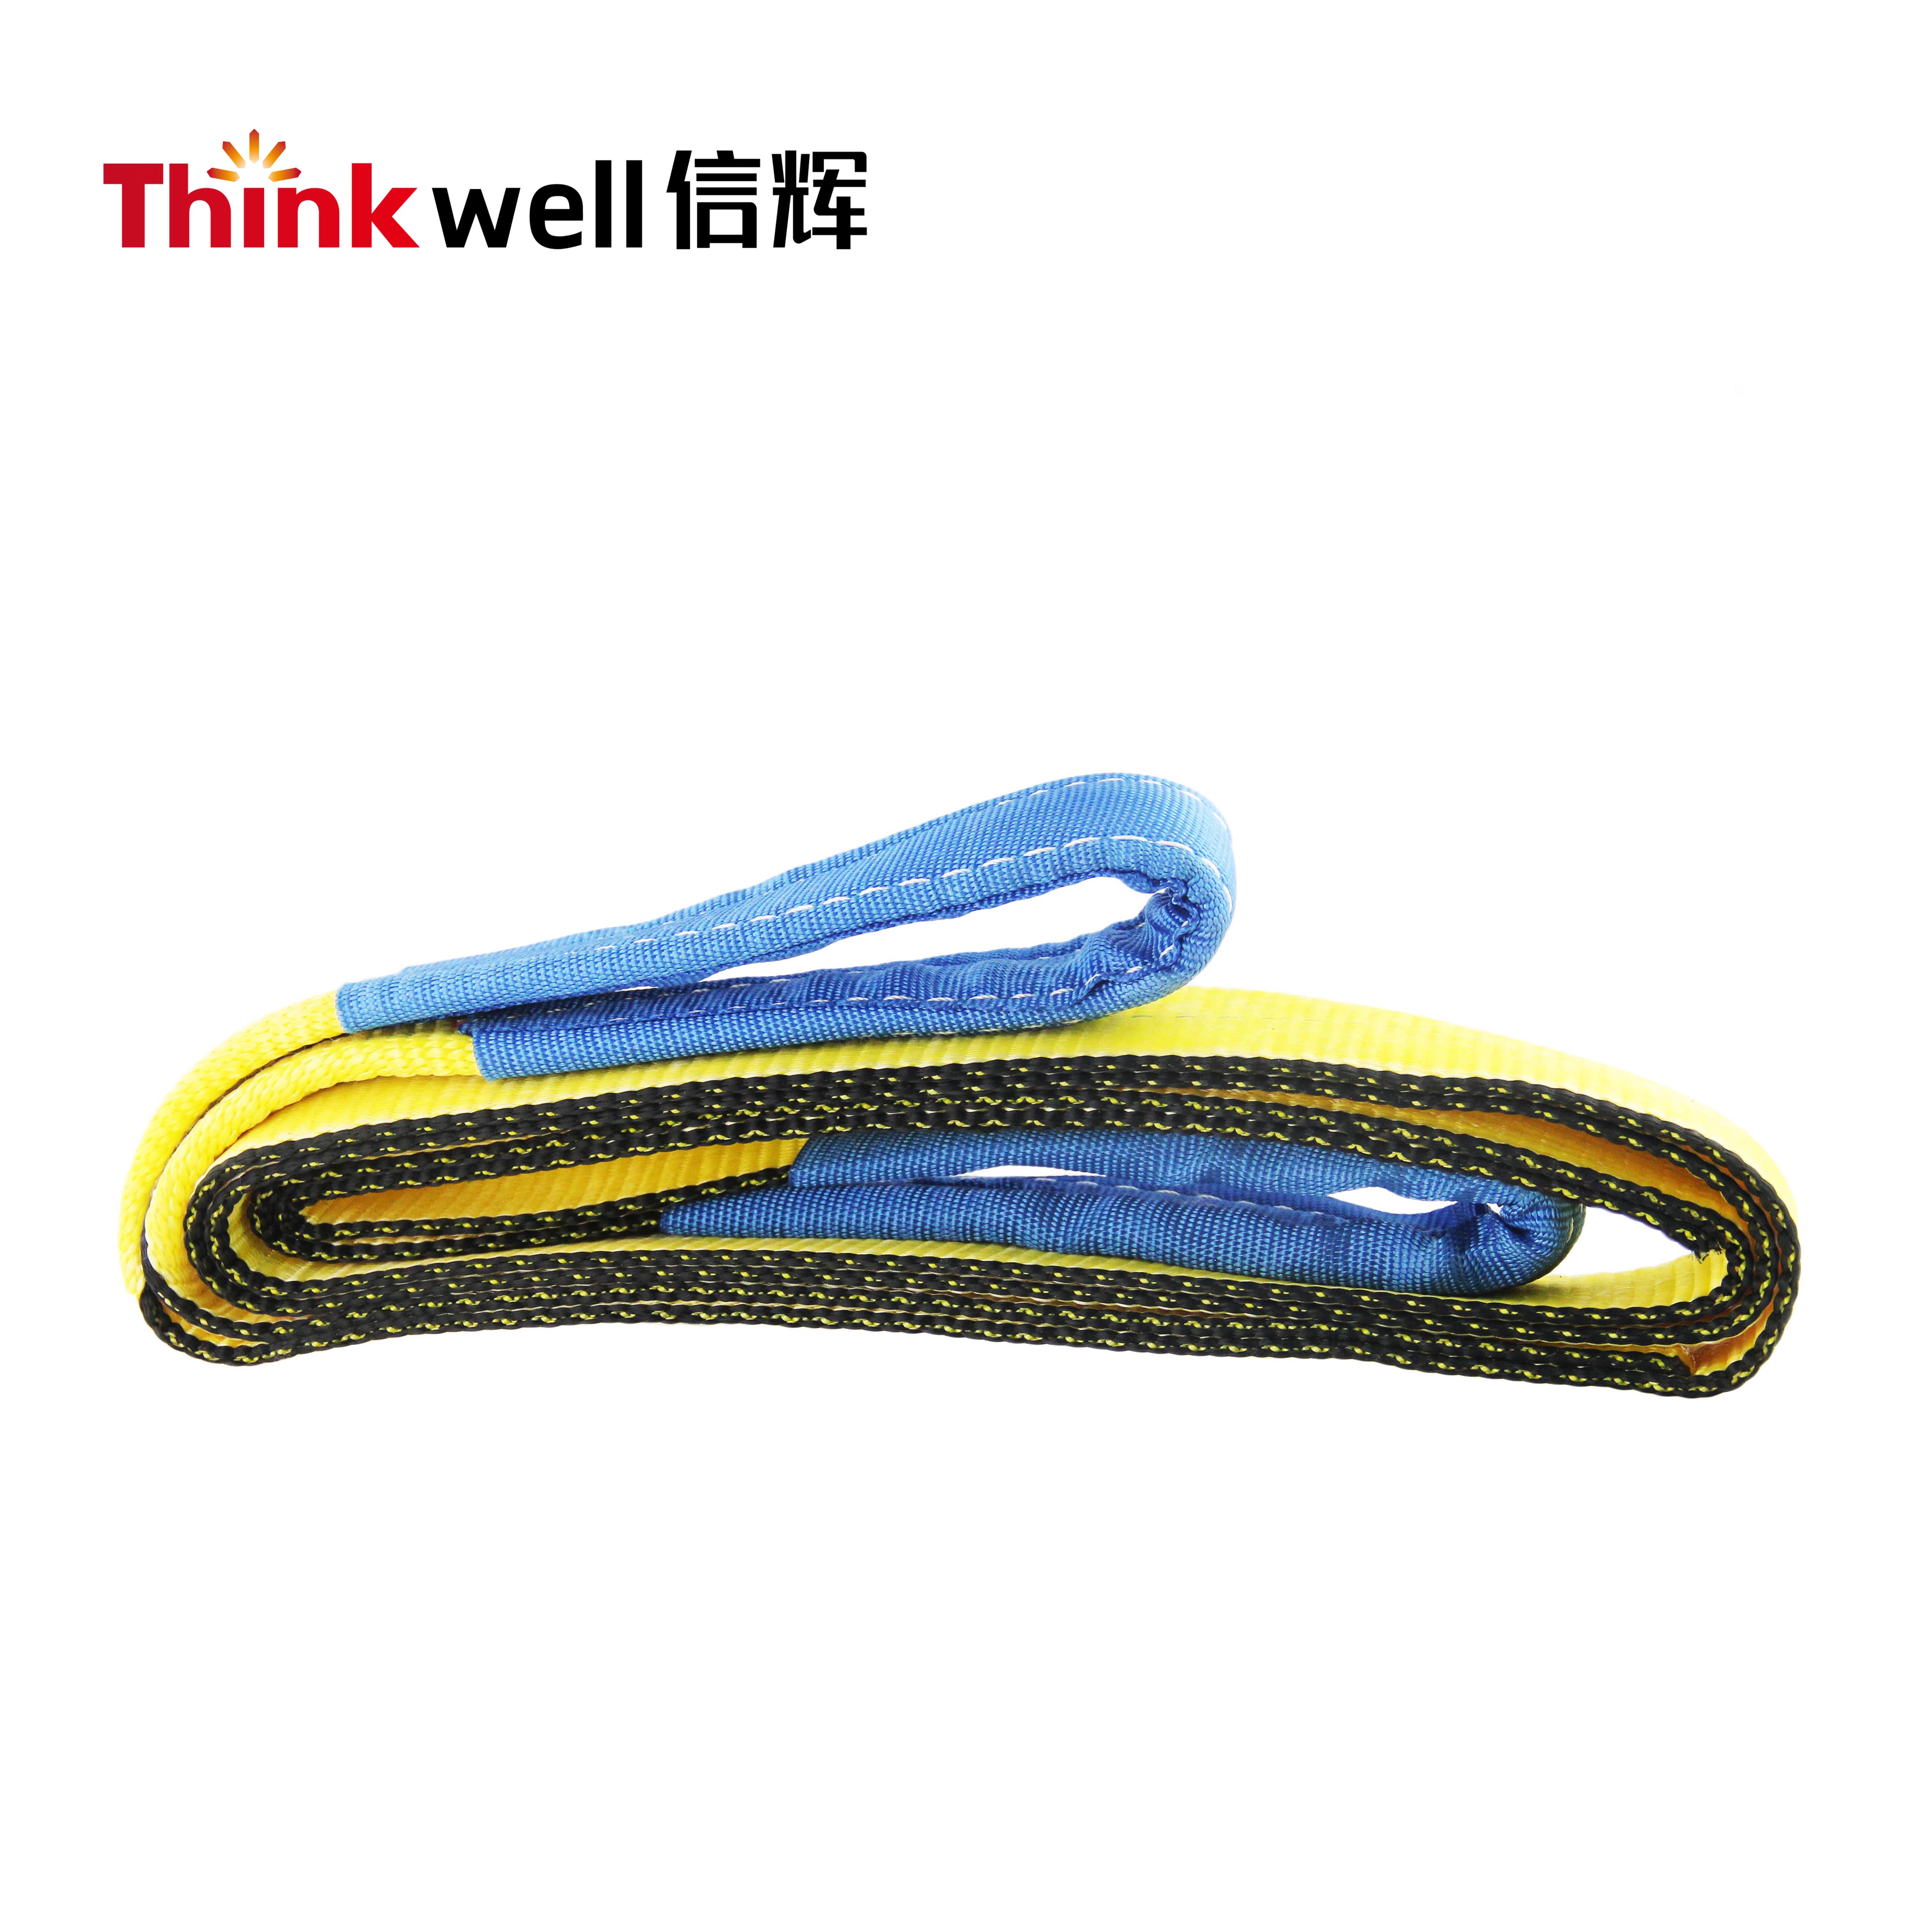 Winch 3"*20ft 30000lbs Tow Strap Manufacturer